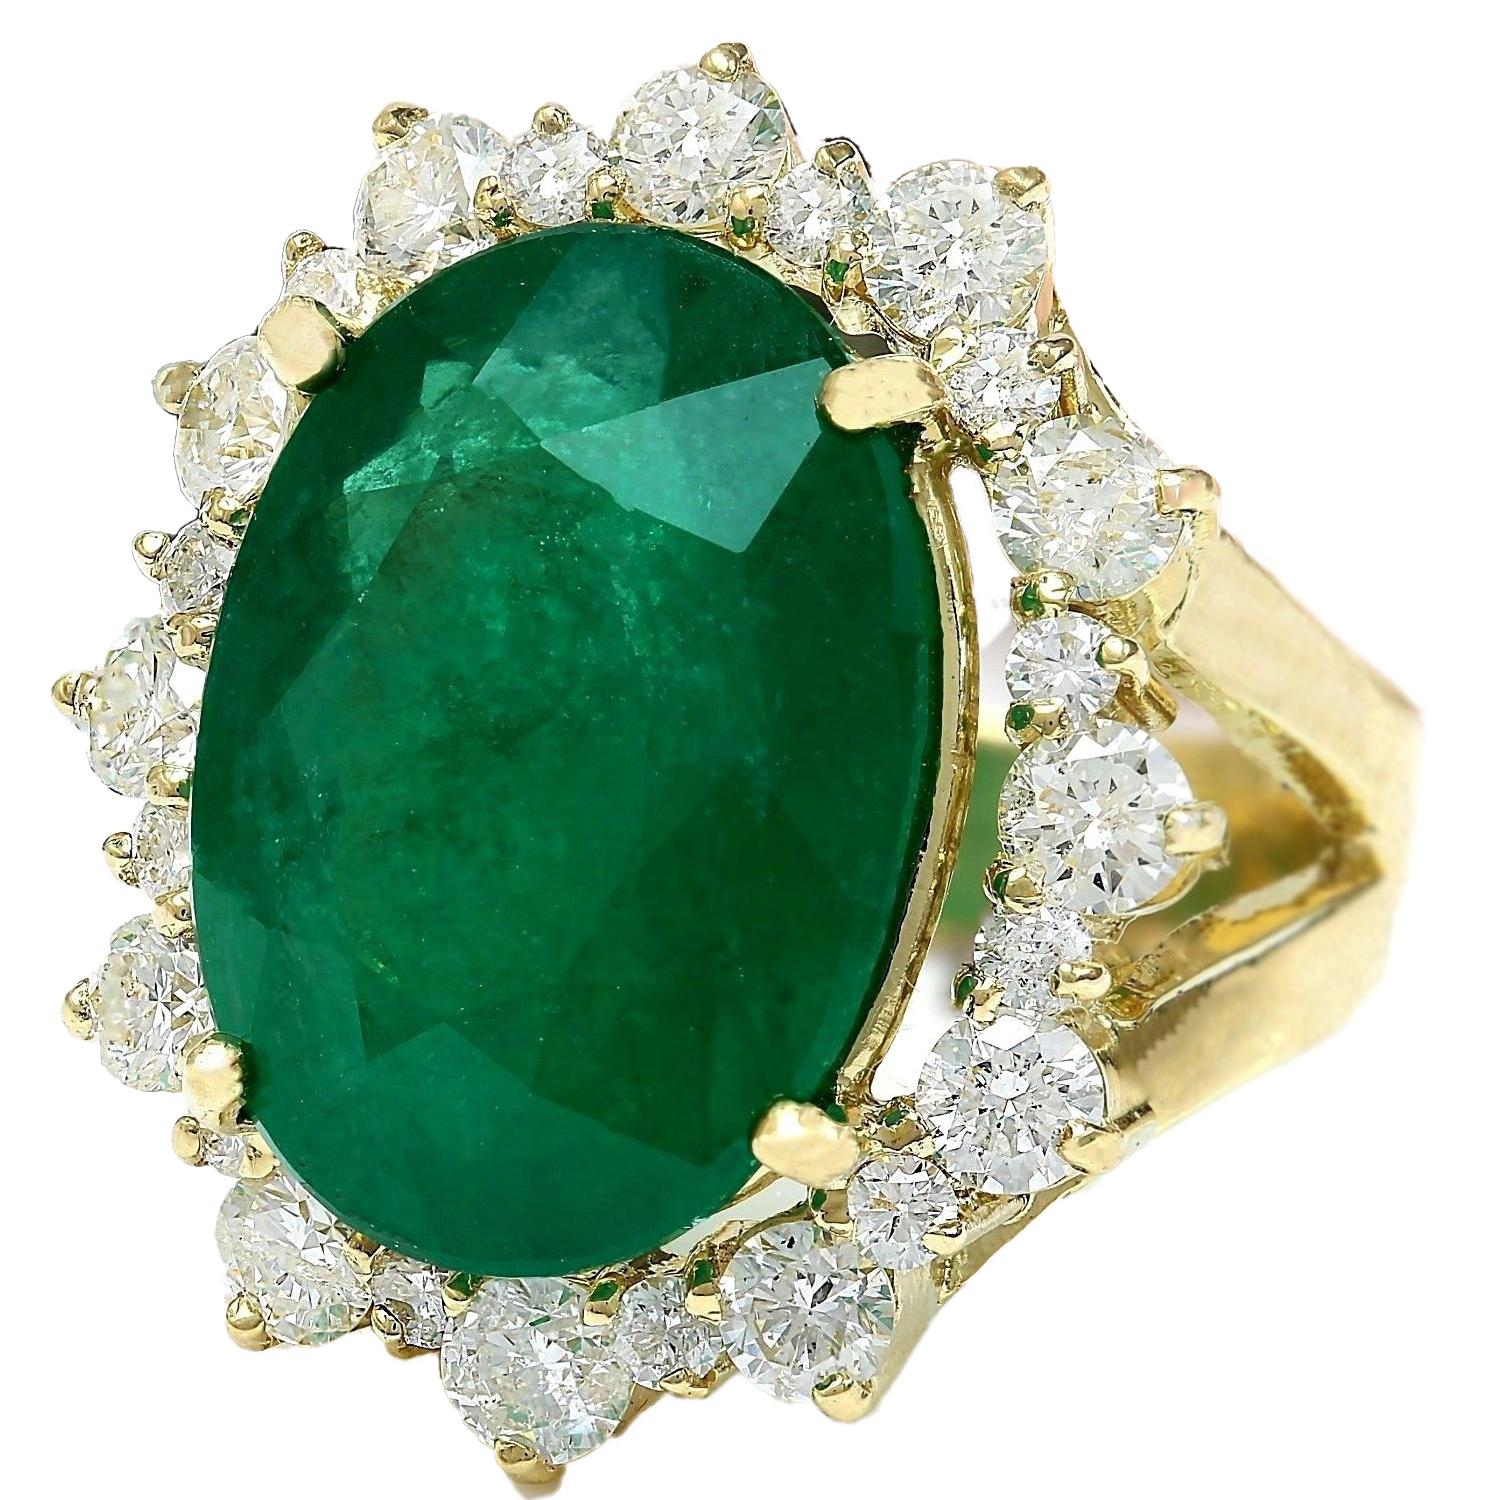 18.59 Carat Natural Emerald 14K Solid Yellow Gold Diamond Ring
Item Type: Ring
Item Style: Cocktail
Material: 14K Yellow Gold
Mainstone: Emerald
Stone Color: Green
Stone Weight: 15.84 Carat
Stone Shape: Oval
Stone Quantity: 1
Stone Dimensions: